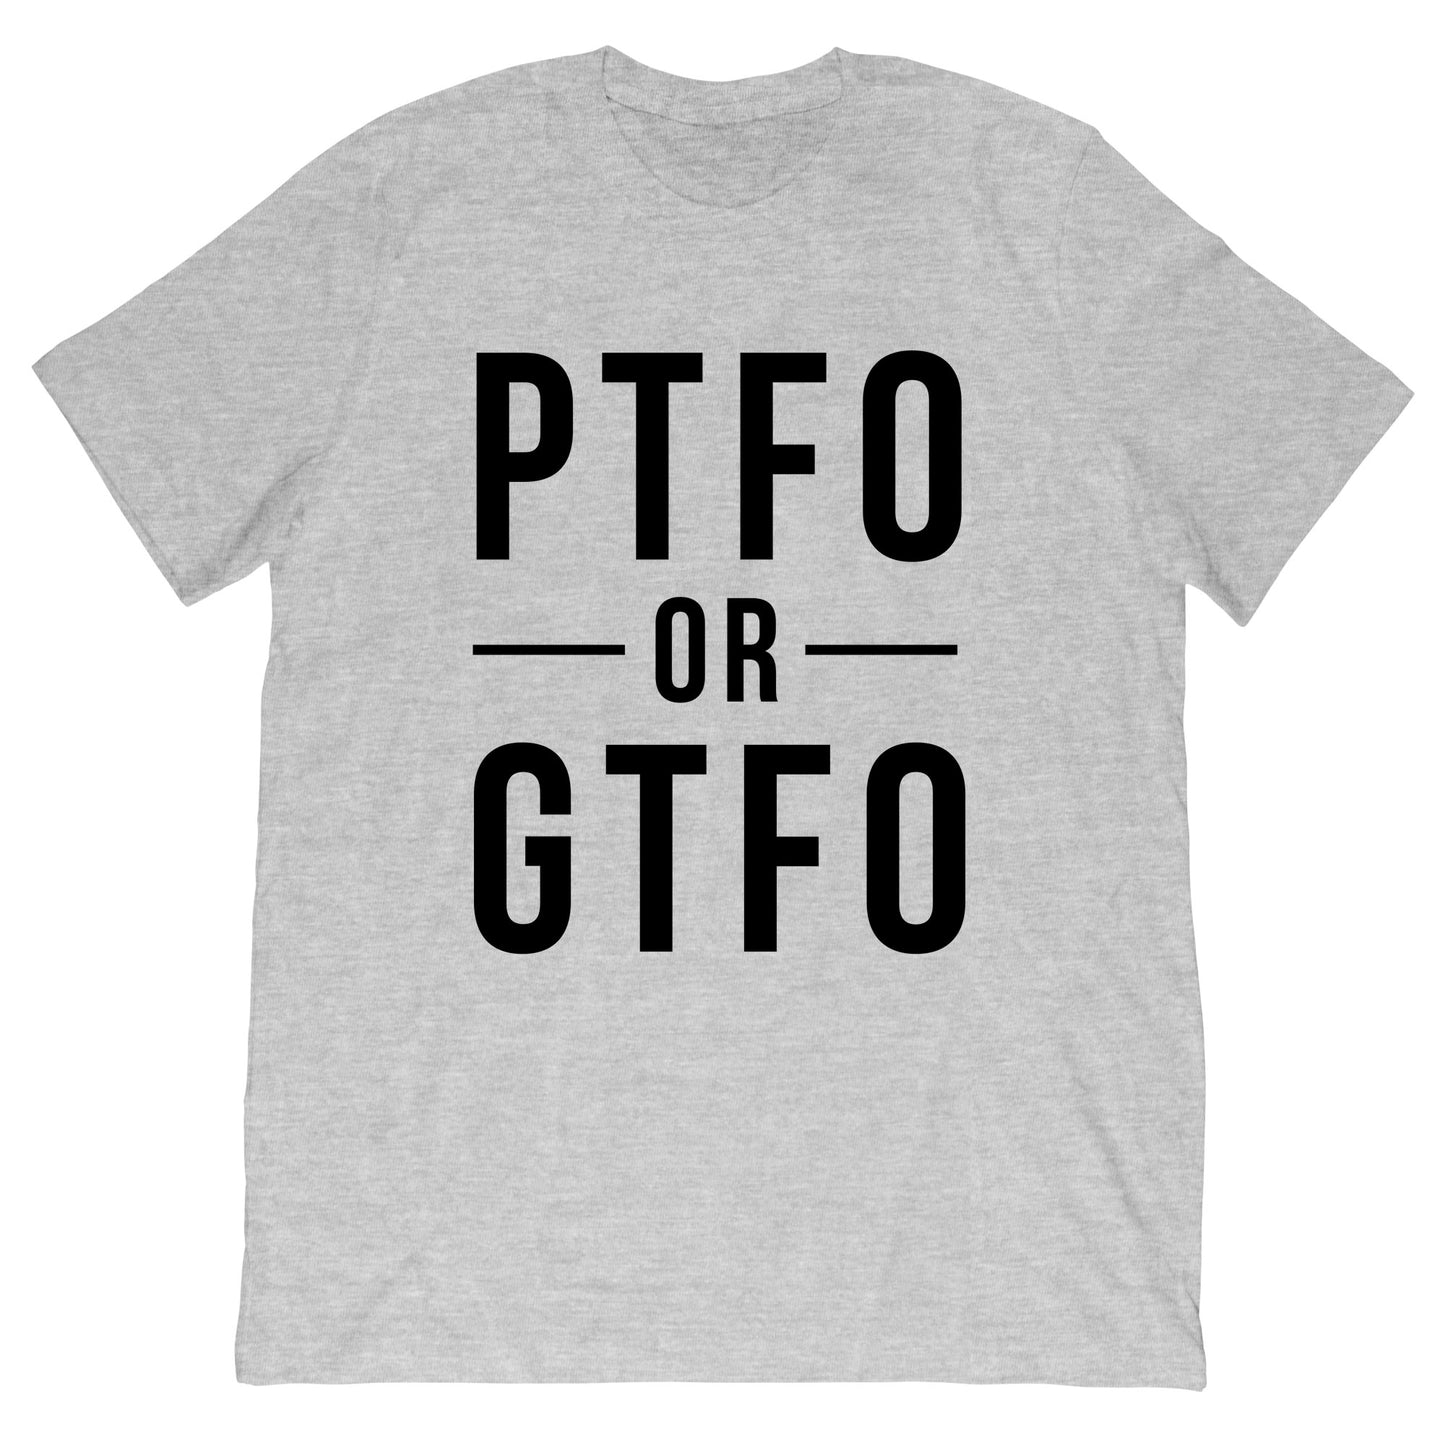 PTFO or GTFO T-Shirt